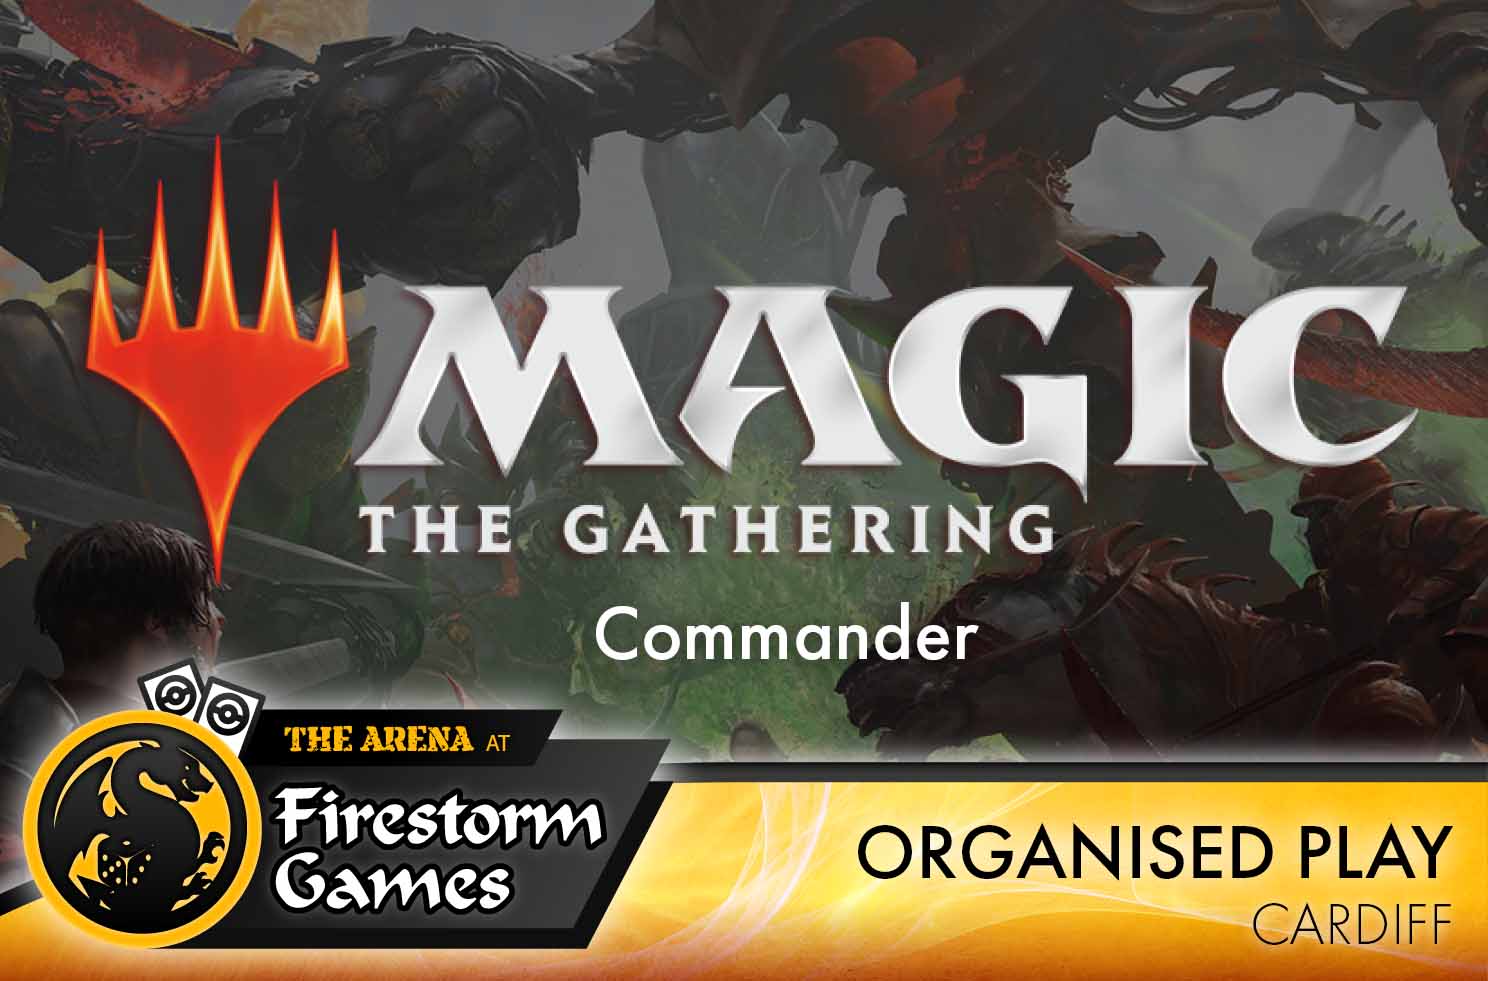 Magic the Gathering Commander Party